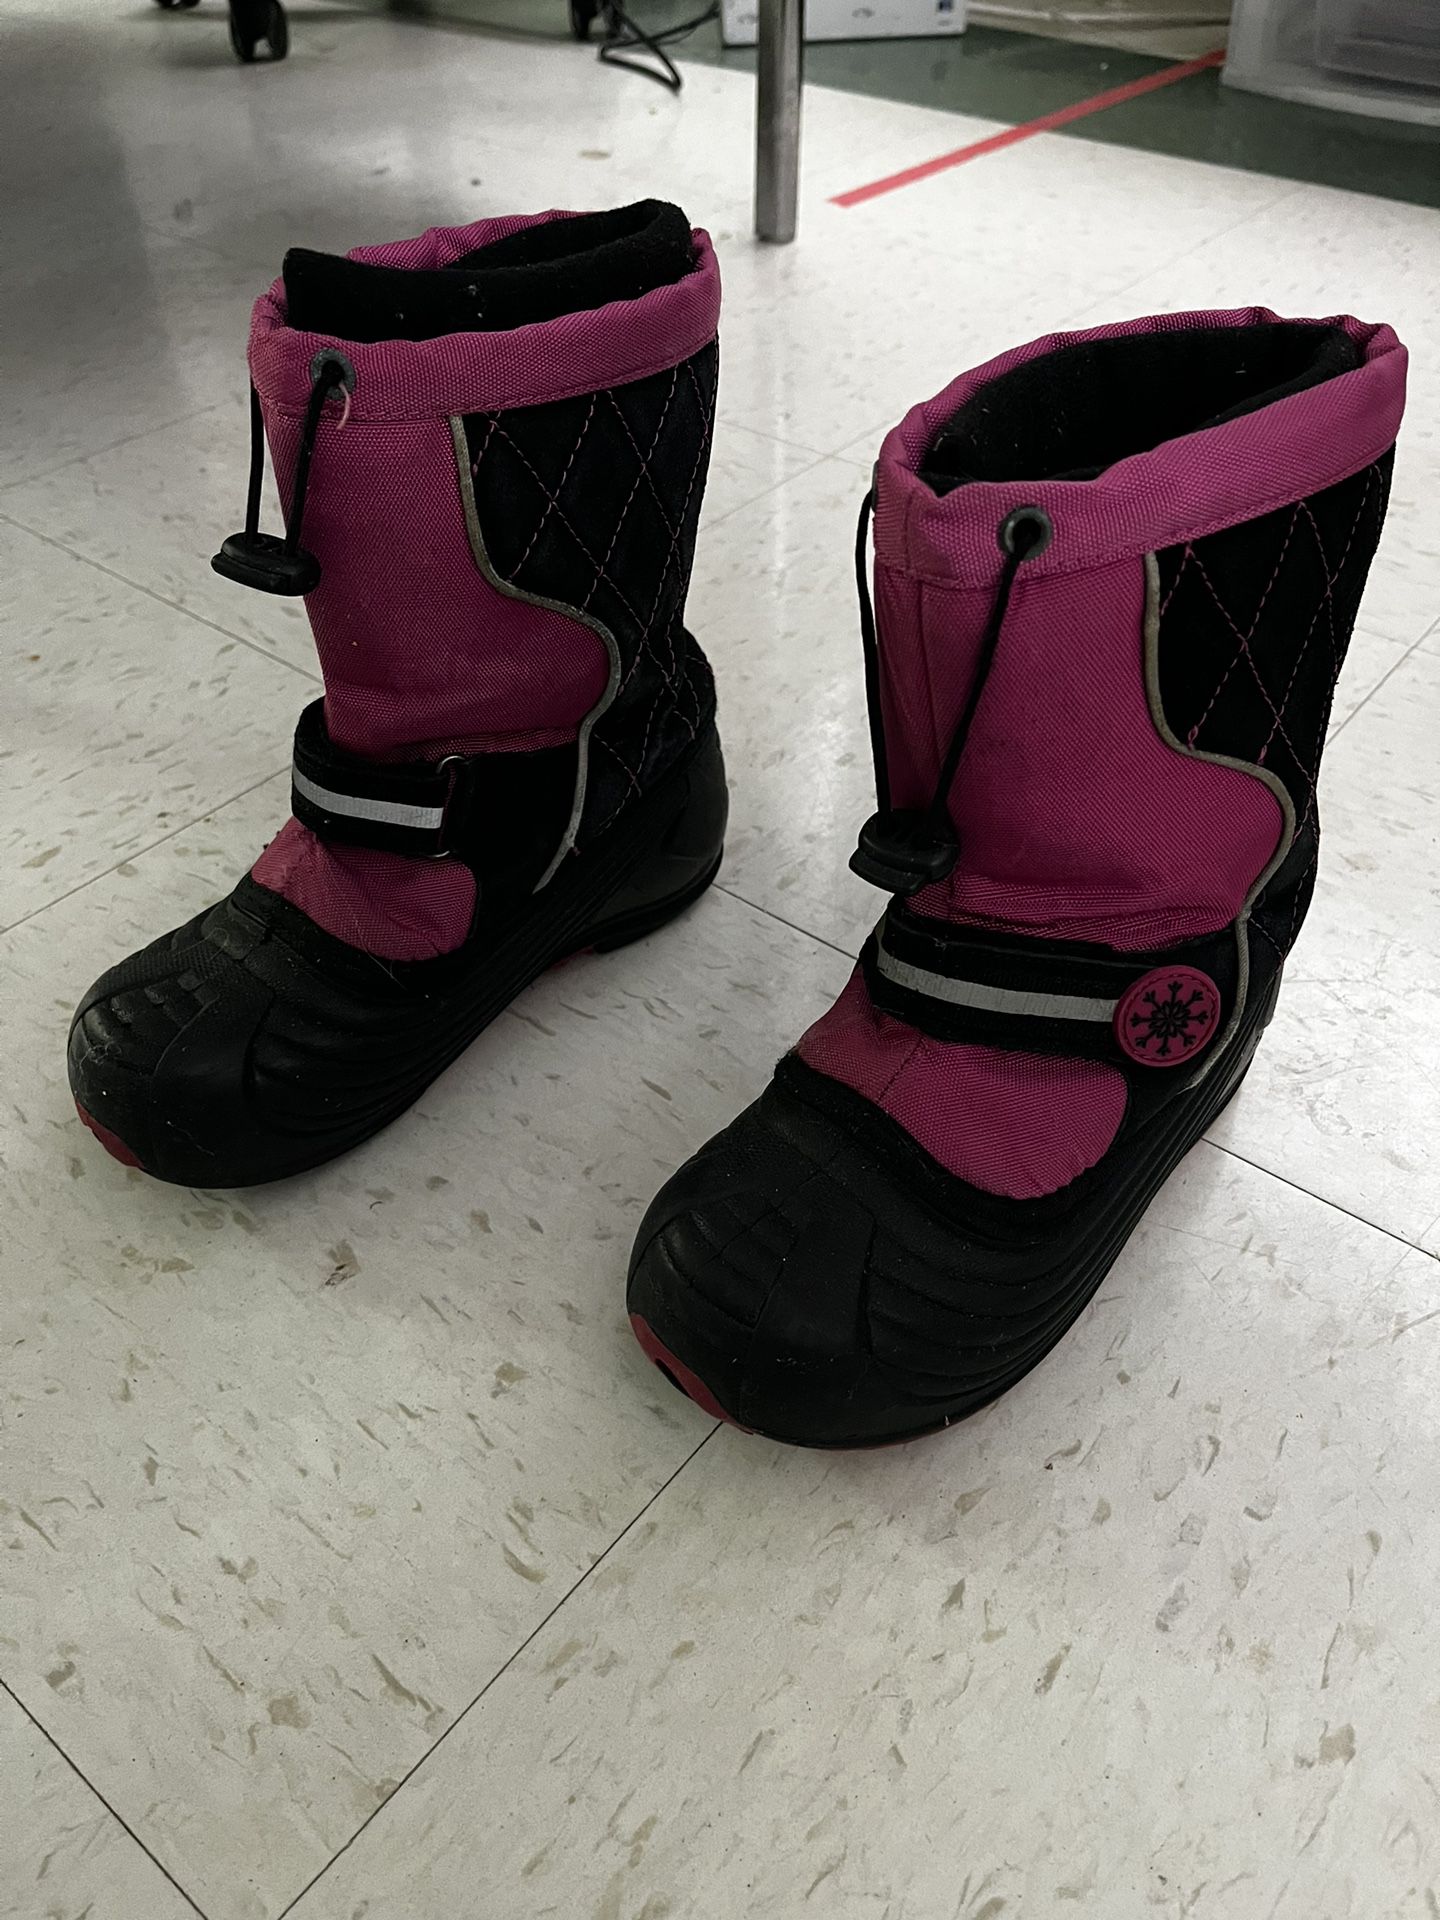 TOTES GIRLS TODDLER SNOW BOOTS SZ 1 